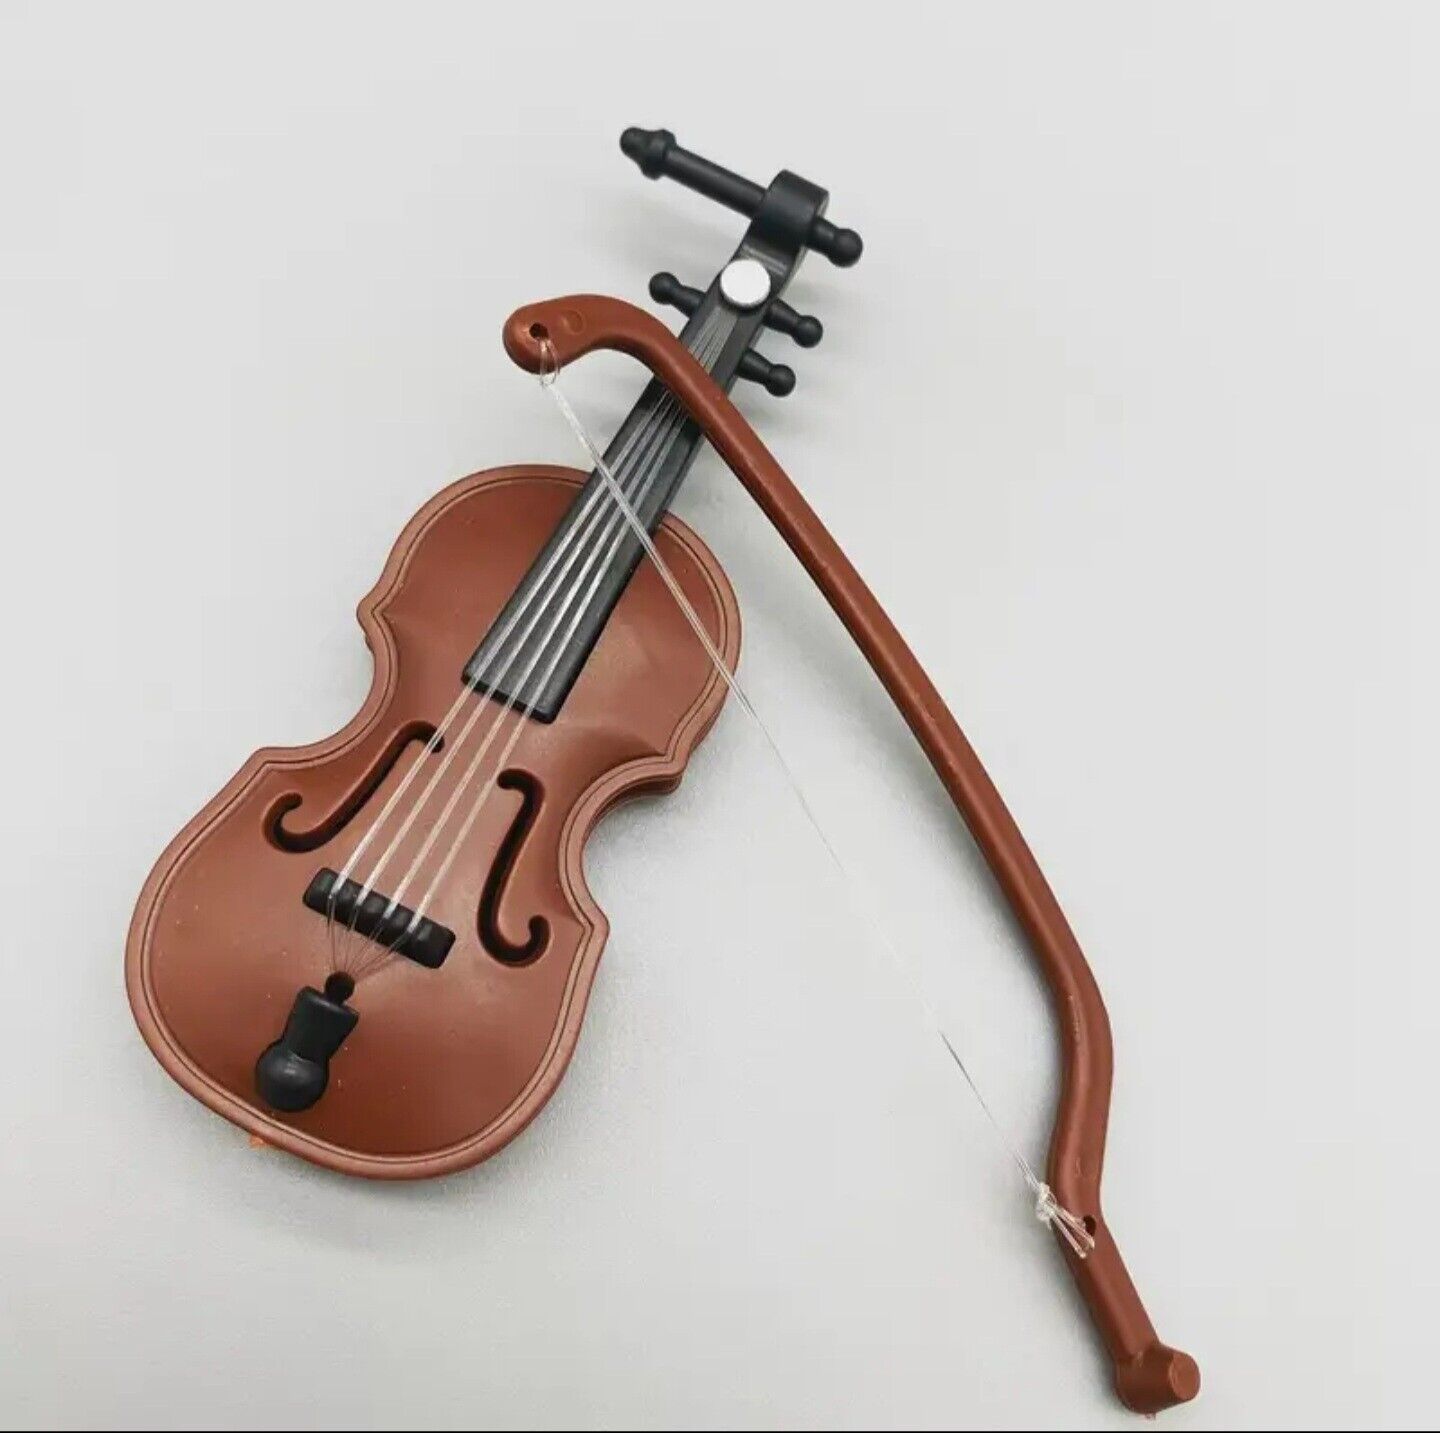 Mini Violin Musical Miniature Instrument Model With Bow Funny Novelty Gift Joke